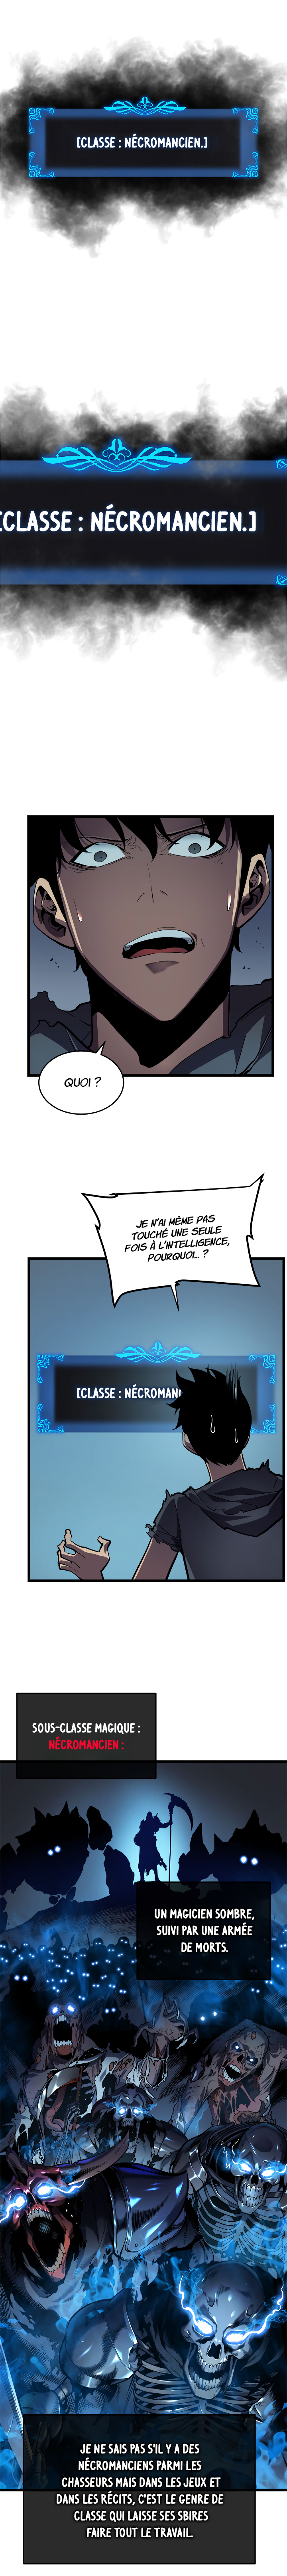 Solo Leveling: Chapter chapitre-45 - Page 2